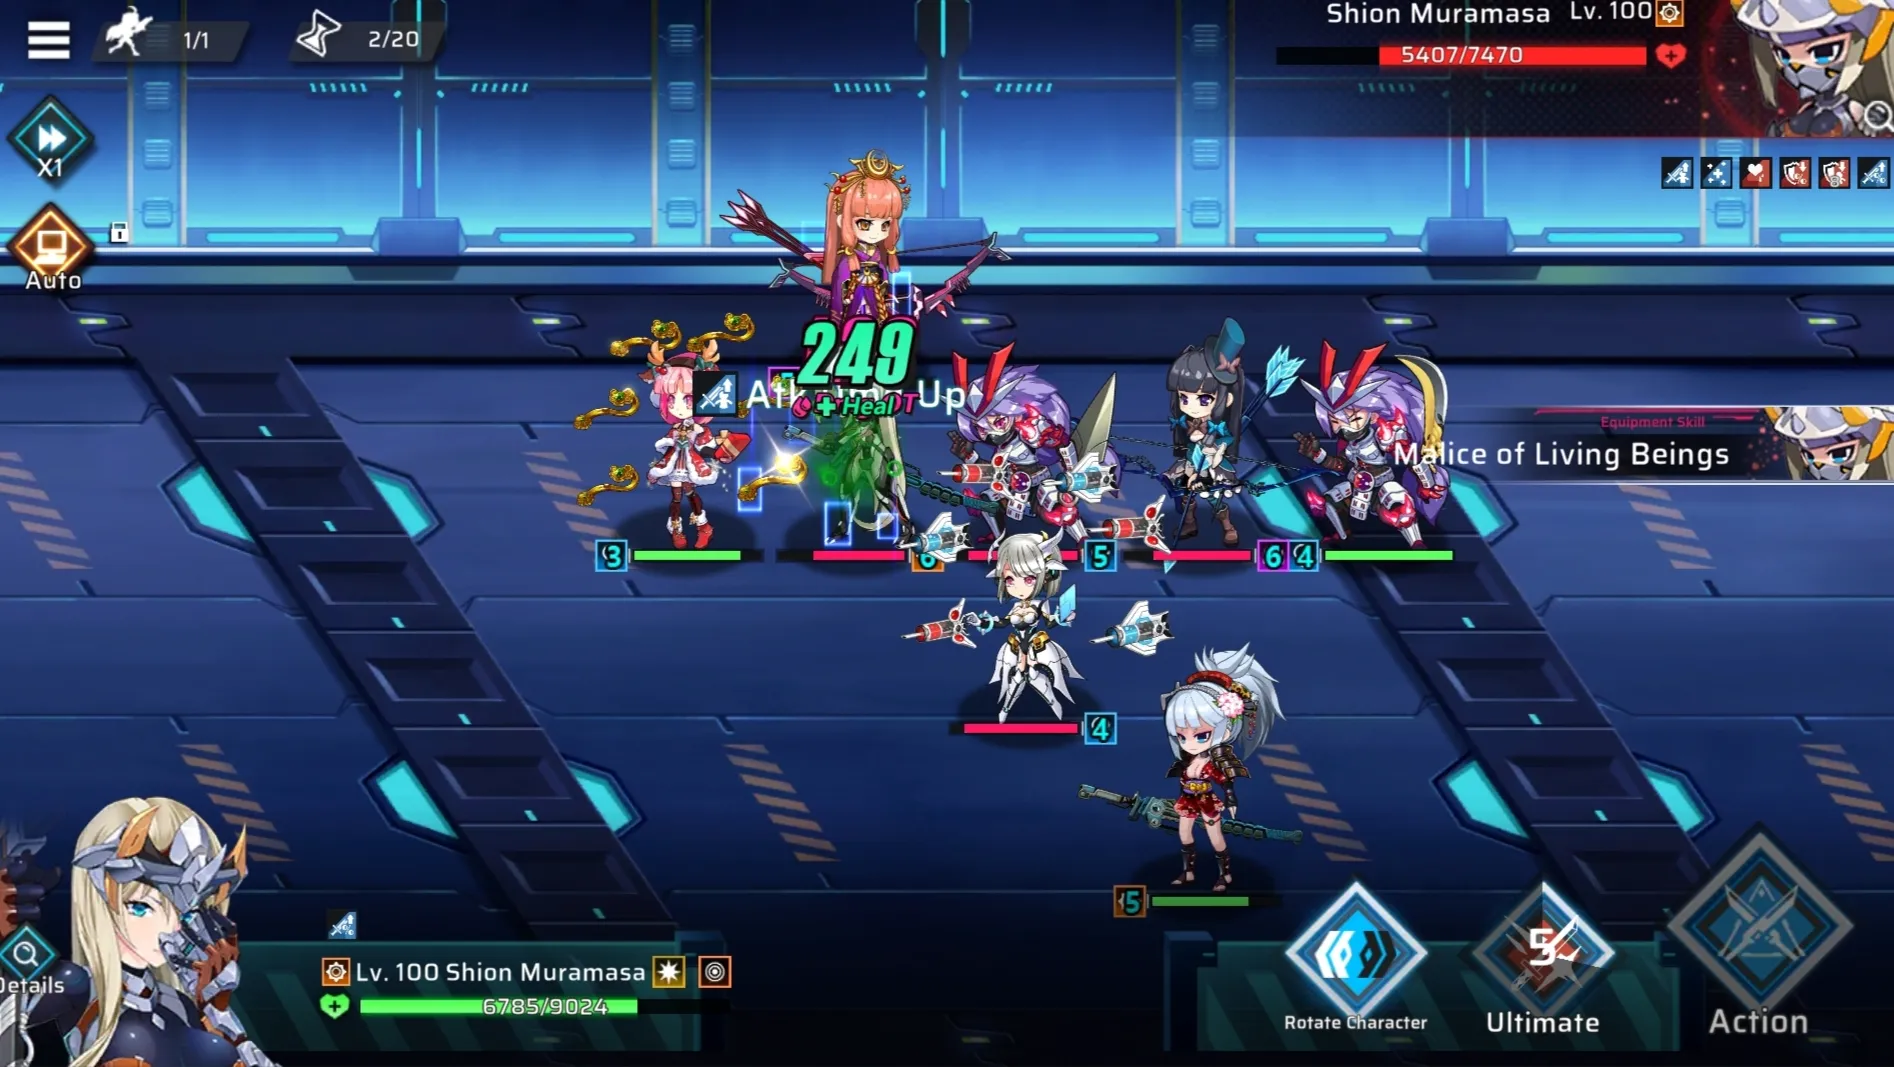 This picture displays the PVP Interface, where players form their teams consisting of heroes and fight against each other to climb up the leaderboards.